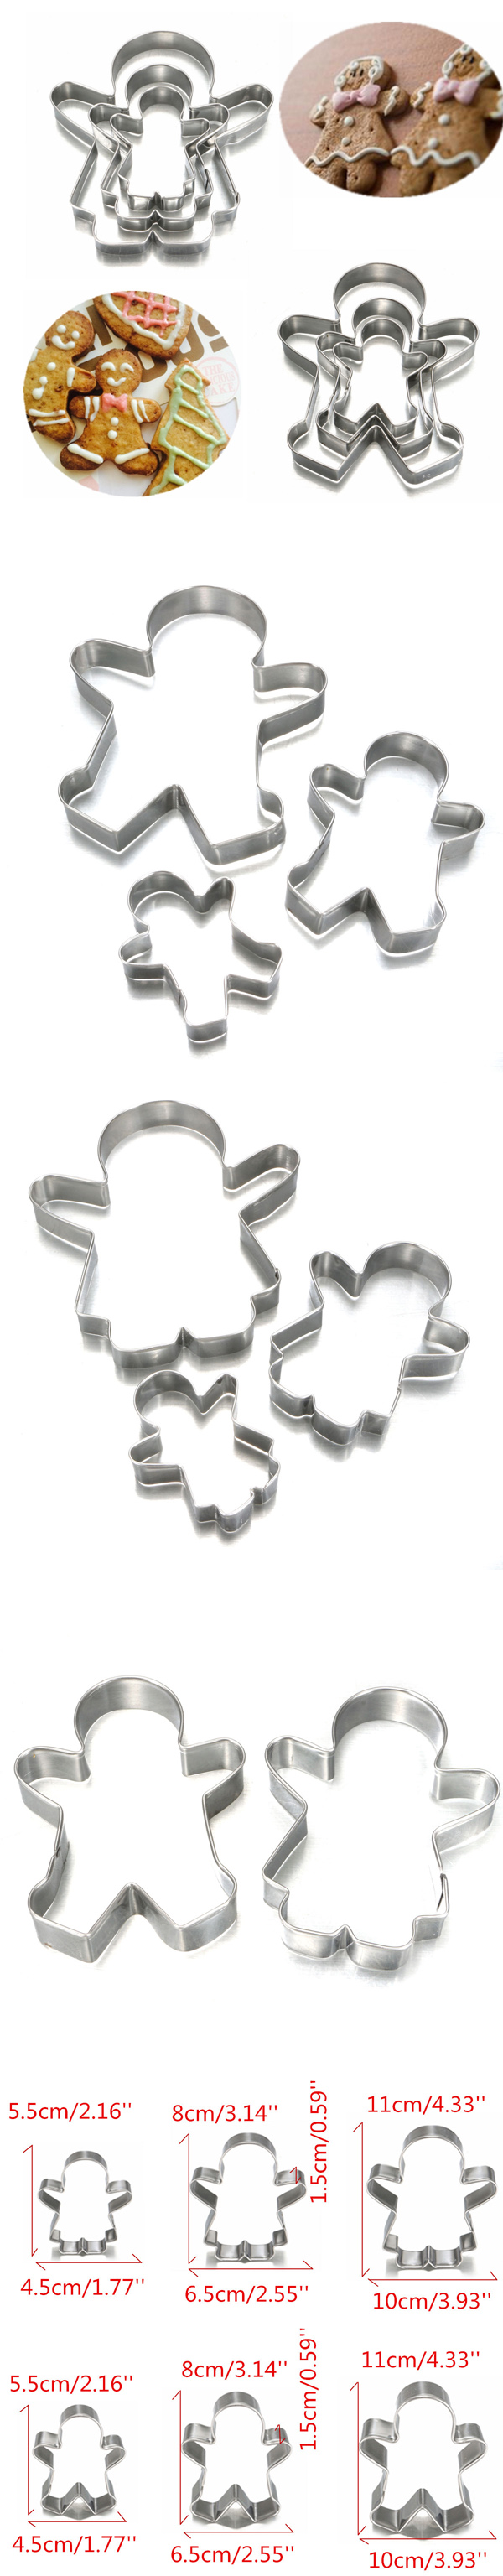 3Pcs-Christmas-Gingerbread-Man-Cookie-Cutter-Stainless-Steel-Biscuit-Mold-1023610